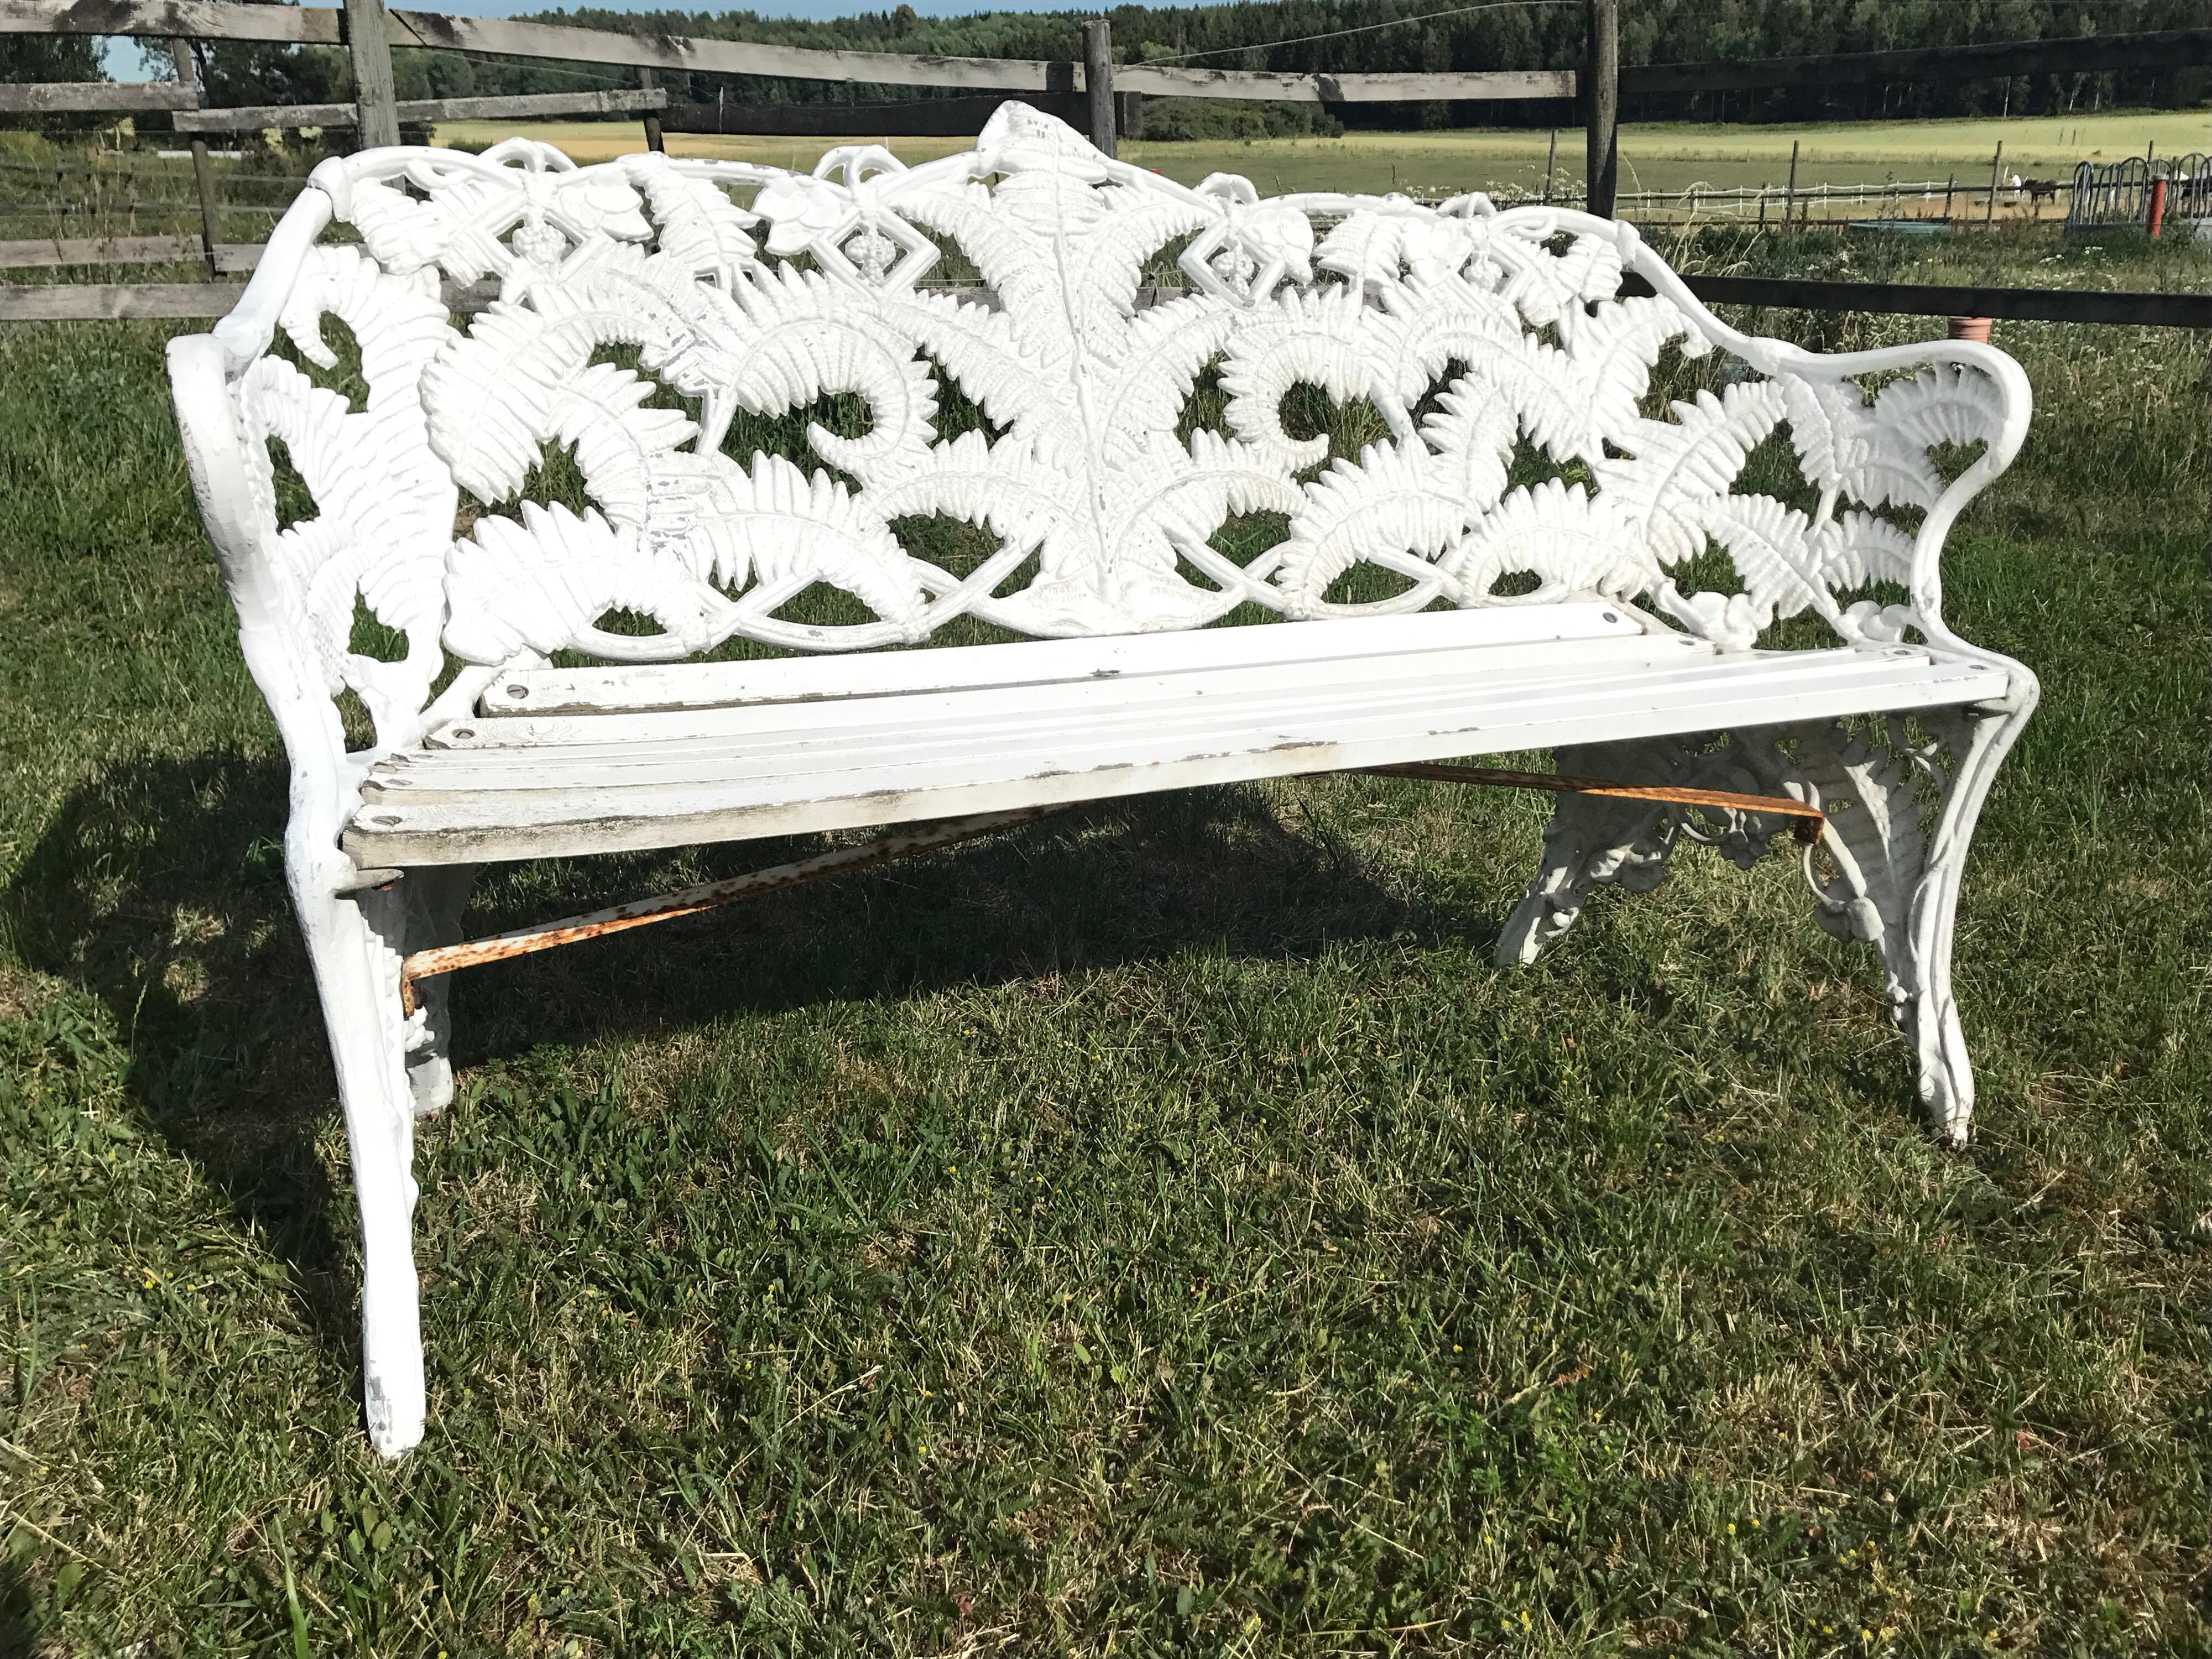 Swedish Fern pattern cast aluminum garden sofa garden bench Art Nouveau style.
A very beautiful Art Nouveau style fern pattern two-seat sofa made by Melins Metallgjutreri AB in the mid-20th century. The armrests, back and legs are made out of cast